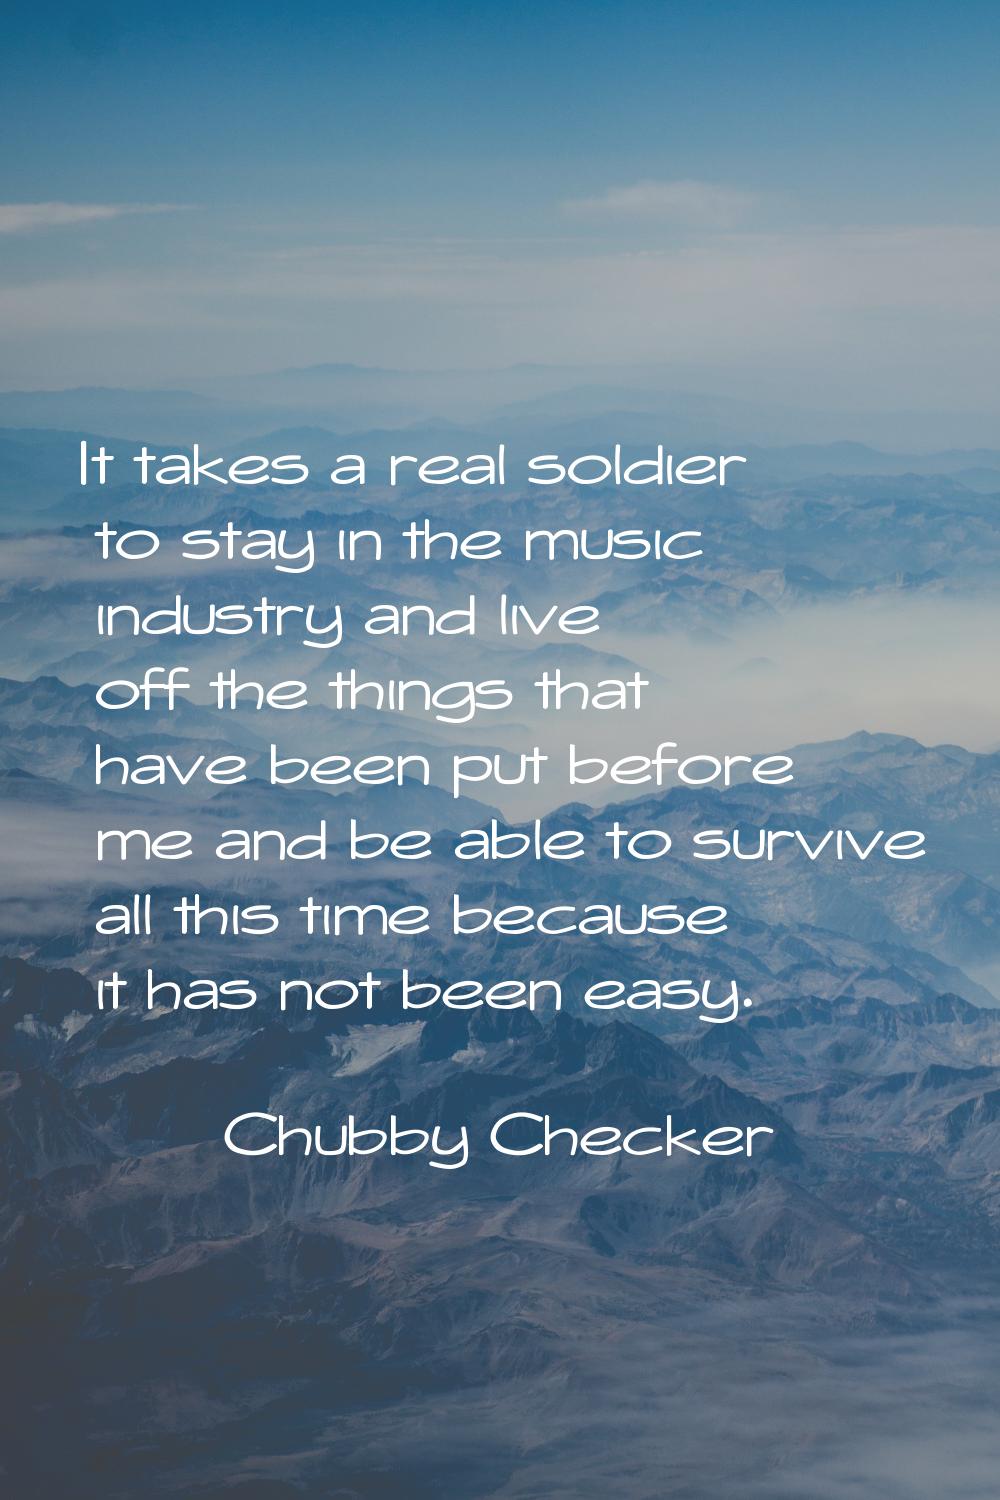 It takes a real soldier to stay in the music industry and live off the things that have been put be